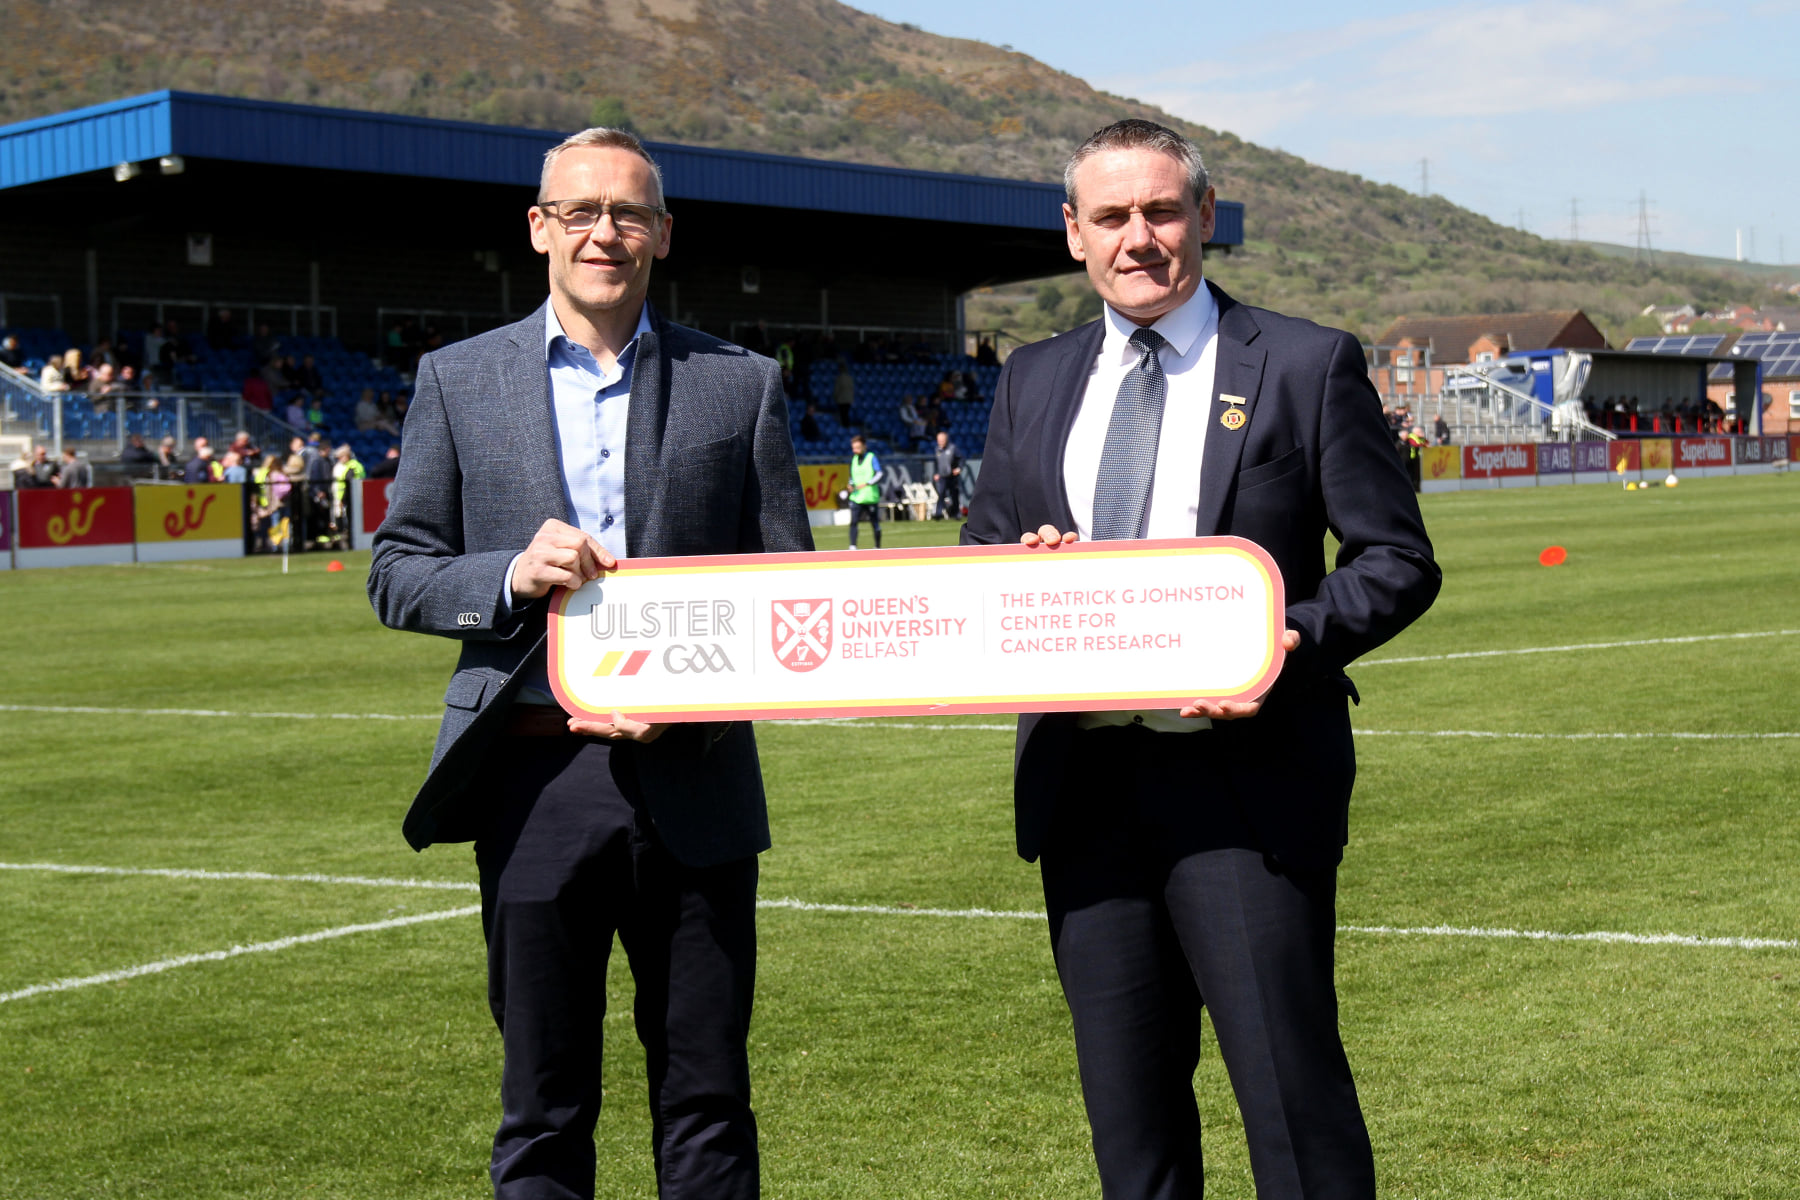 Ulster GAA renews charity partnership with Queen’s University Belfast to support prostate cancer research